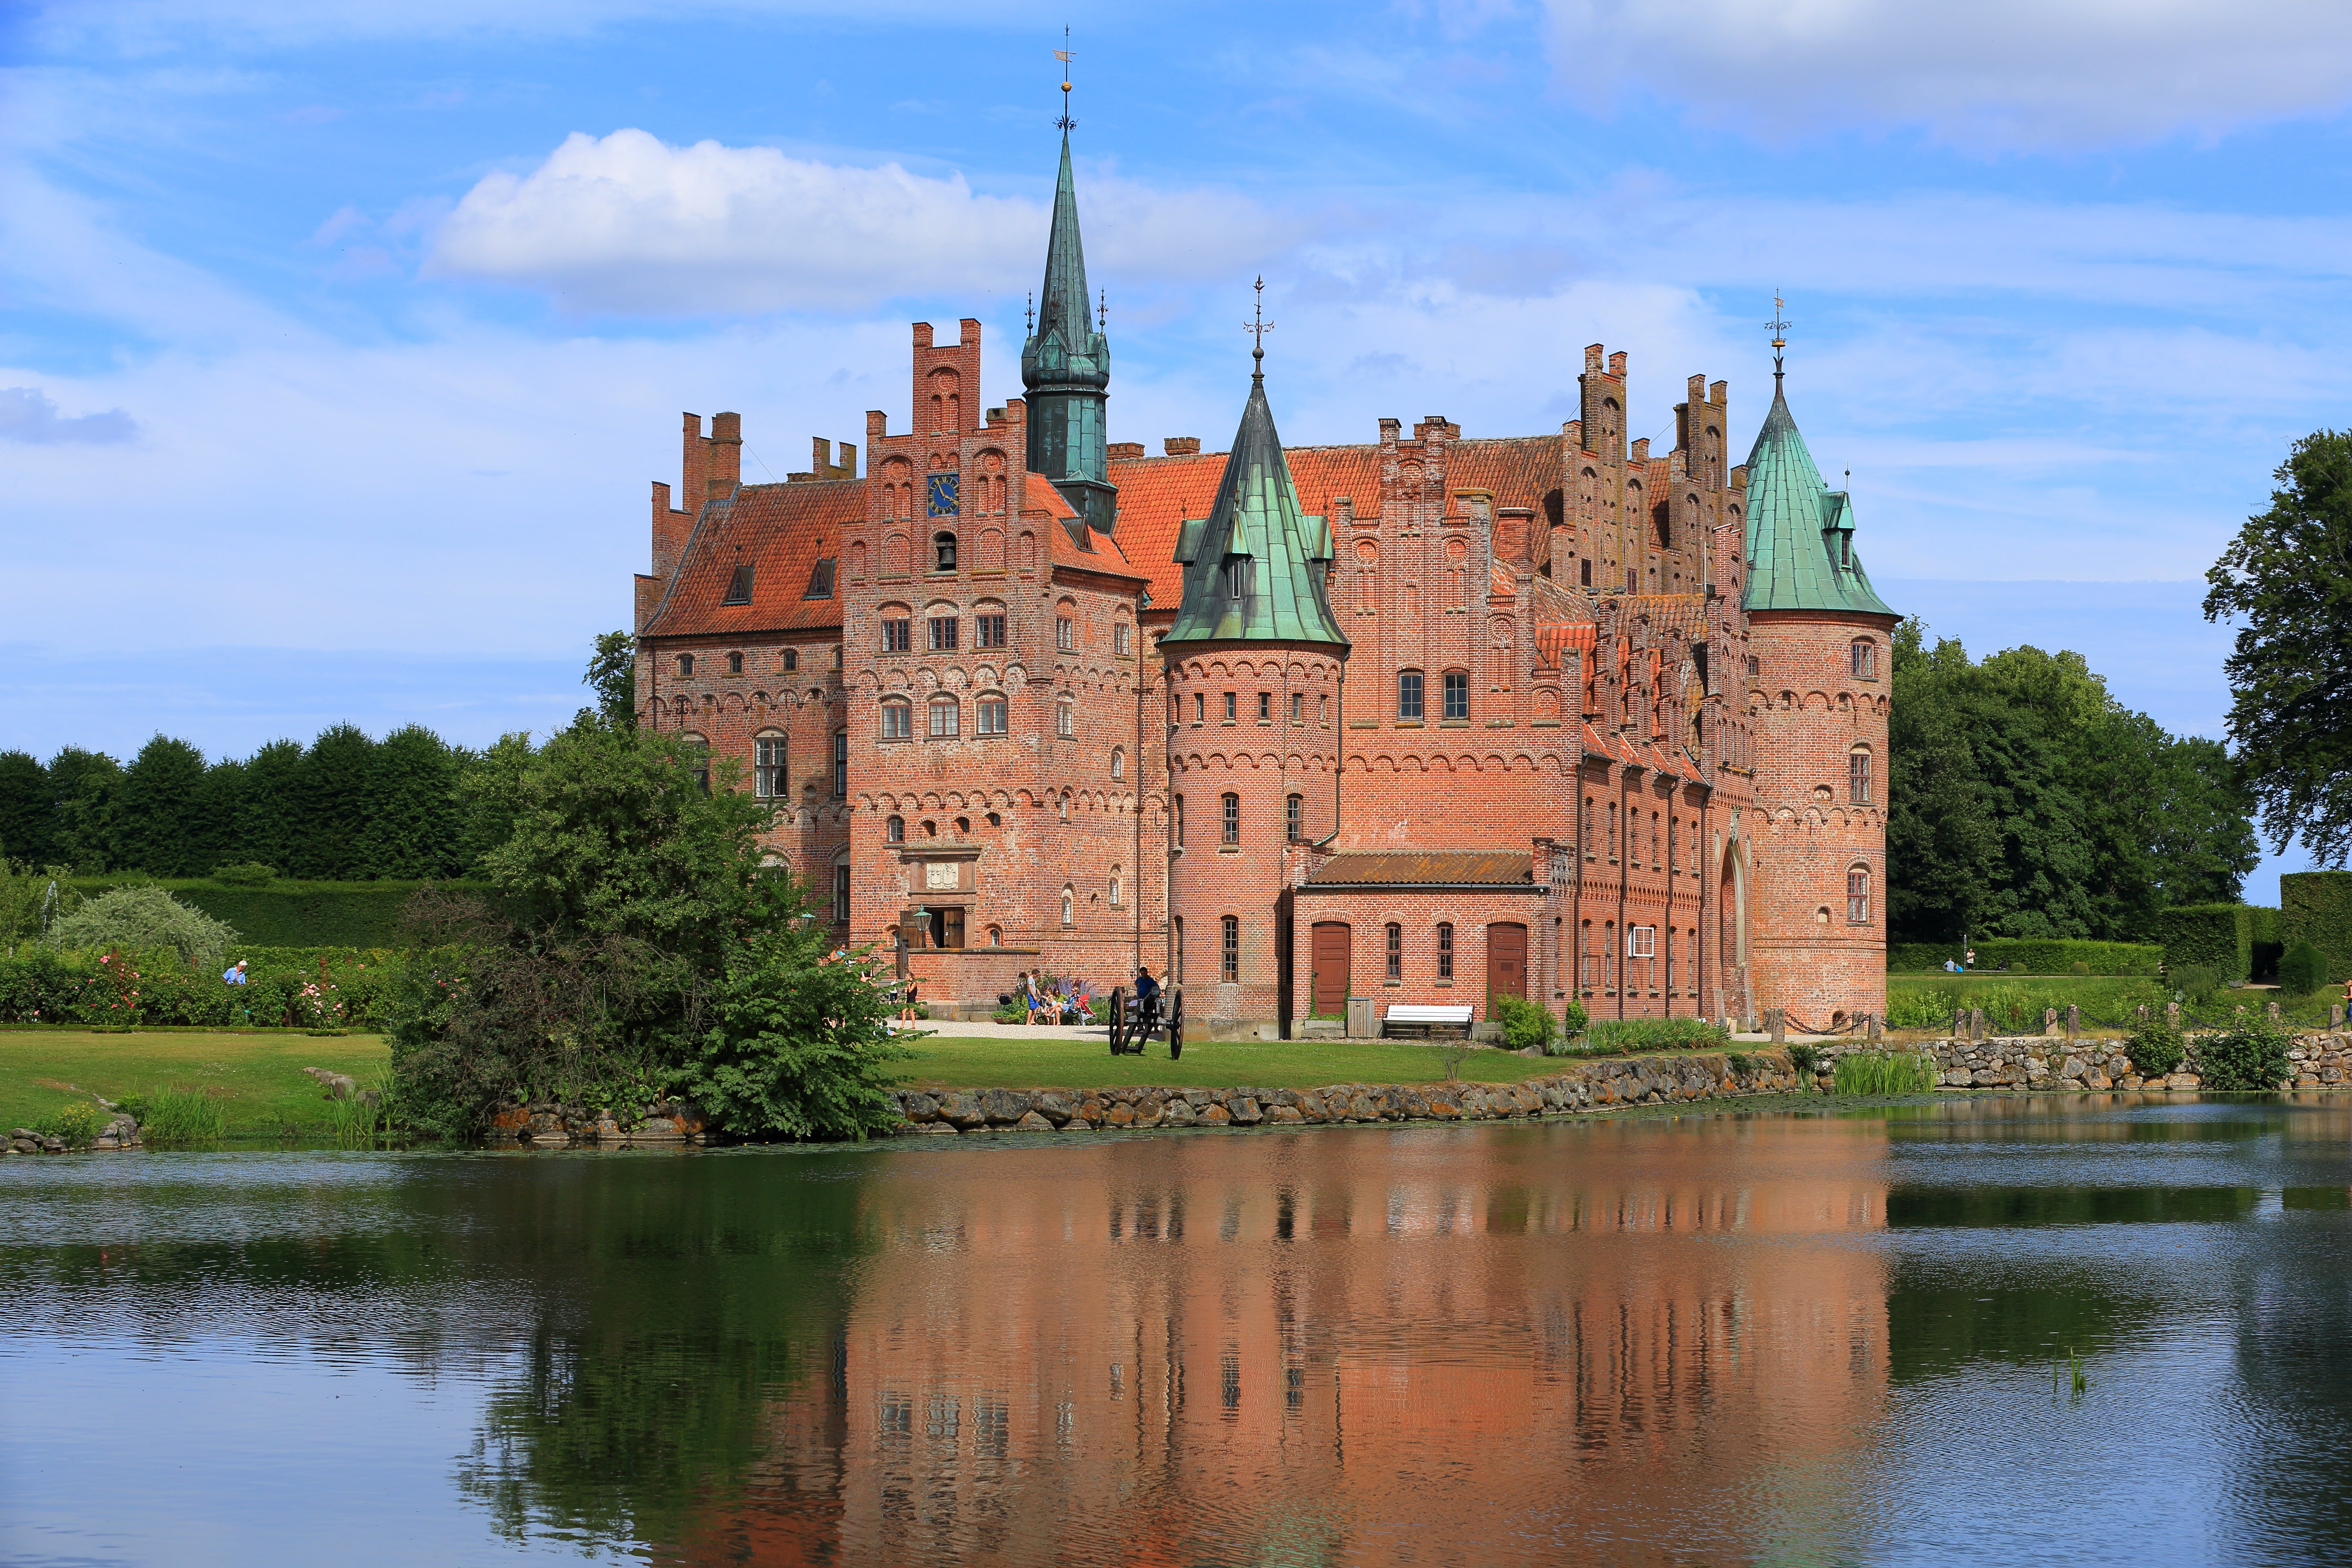 Edgeskov Castle and its rose gardens are an unimissable sight near Odense